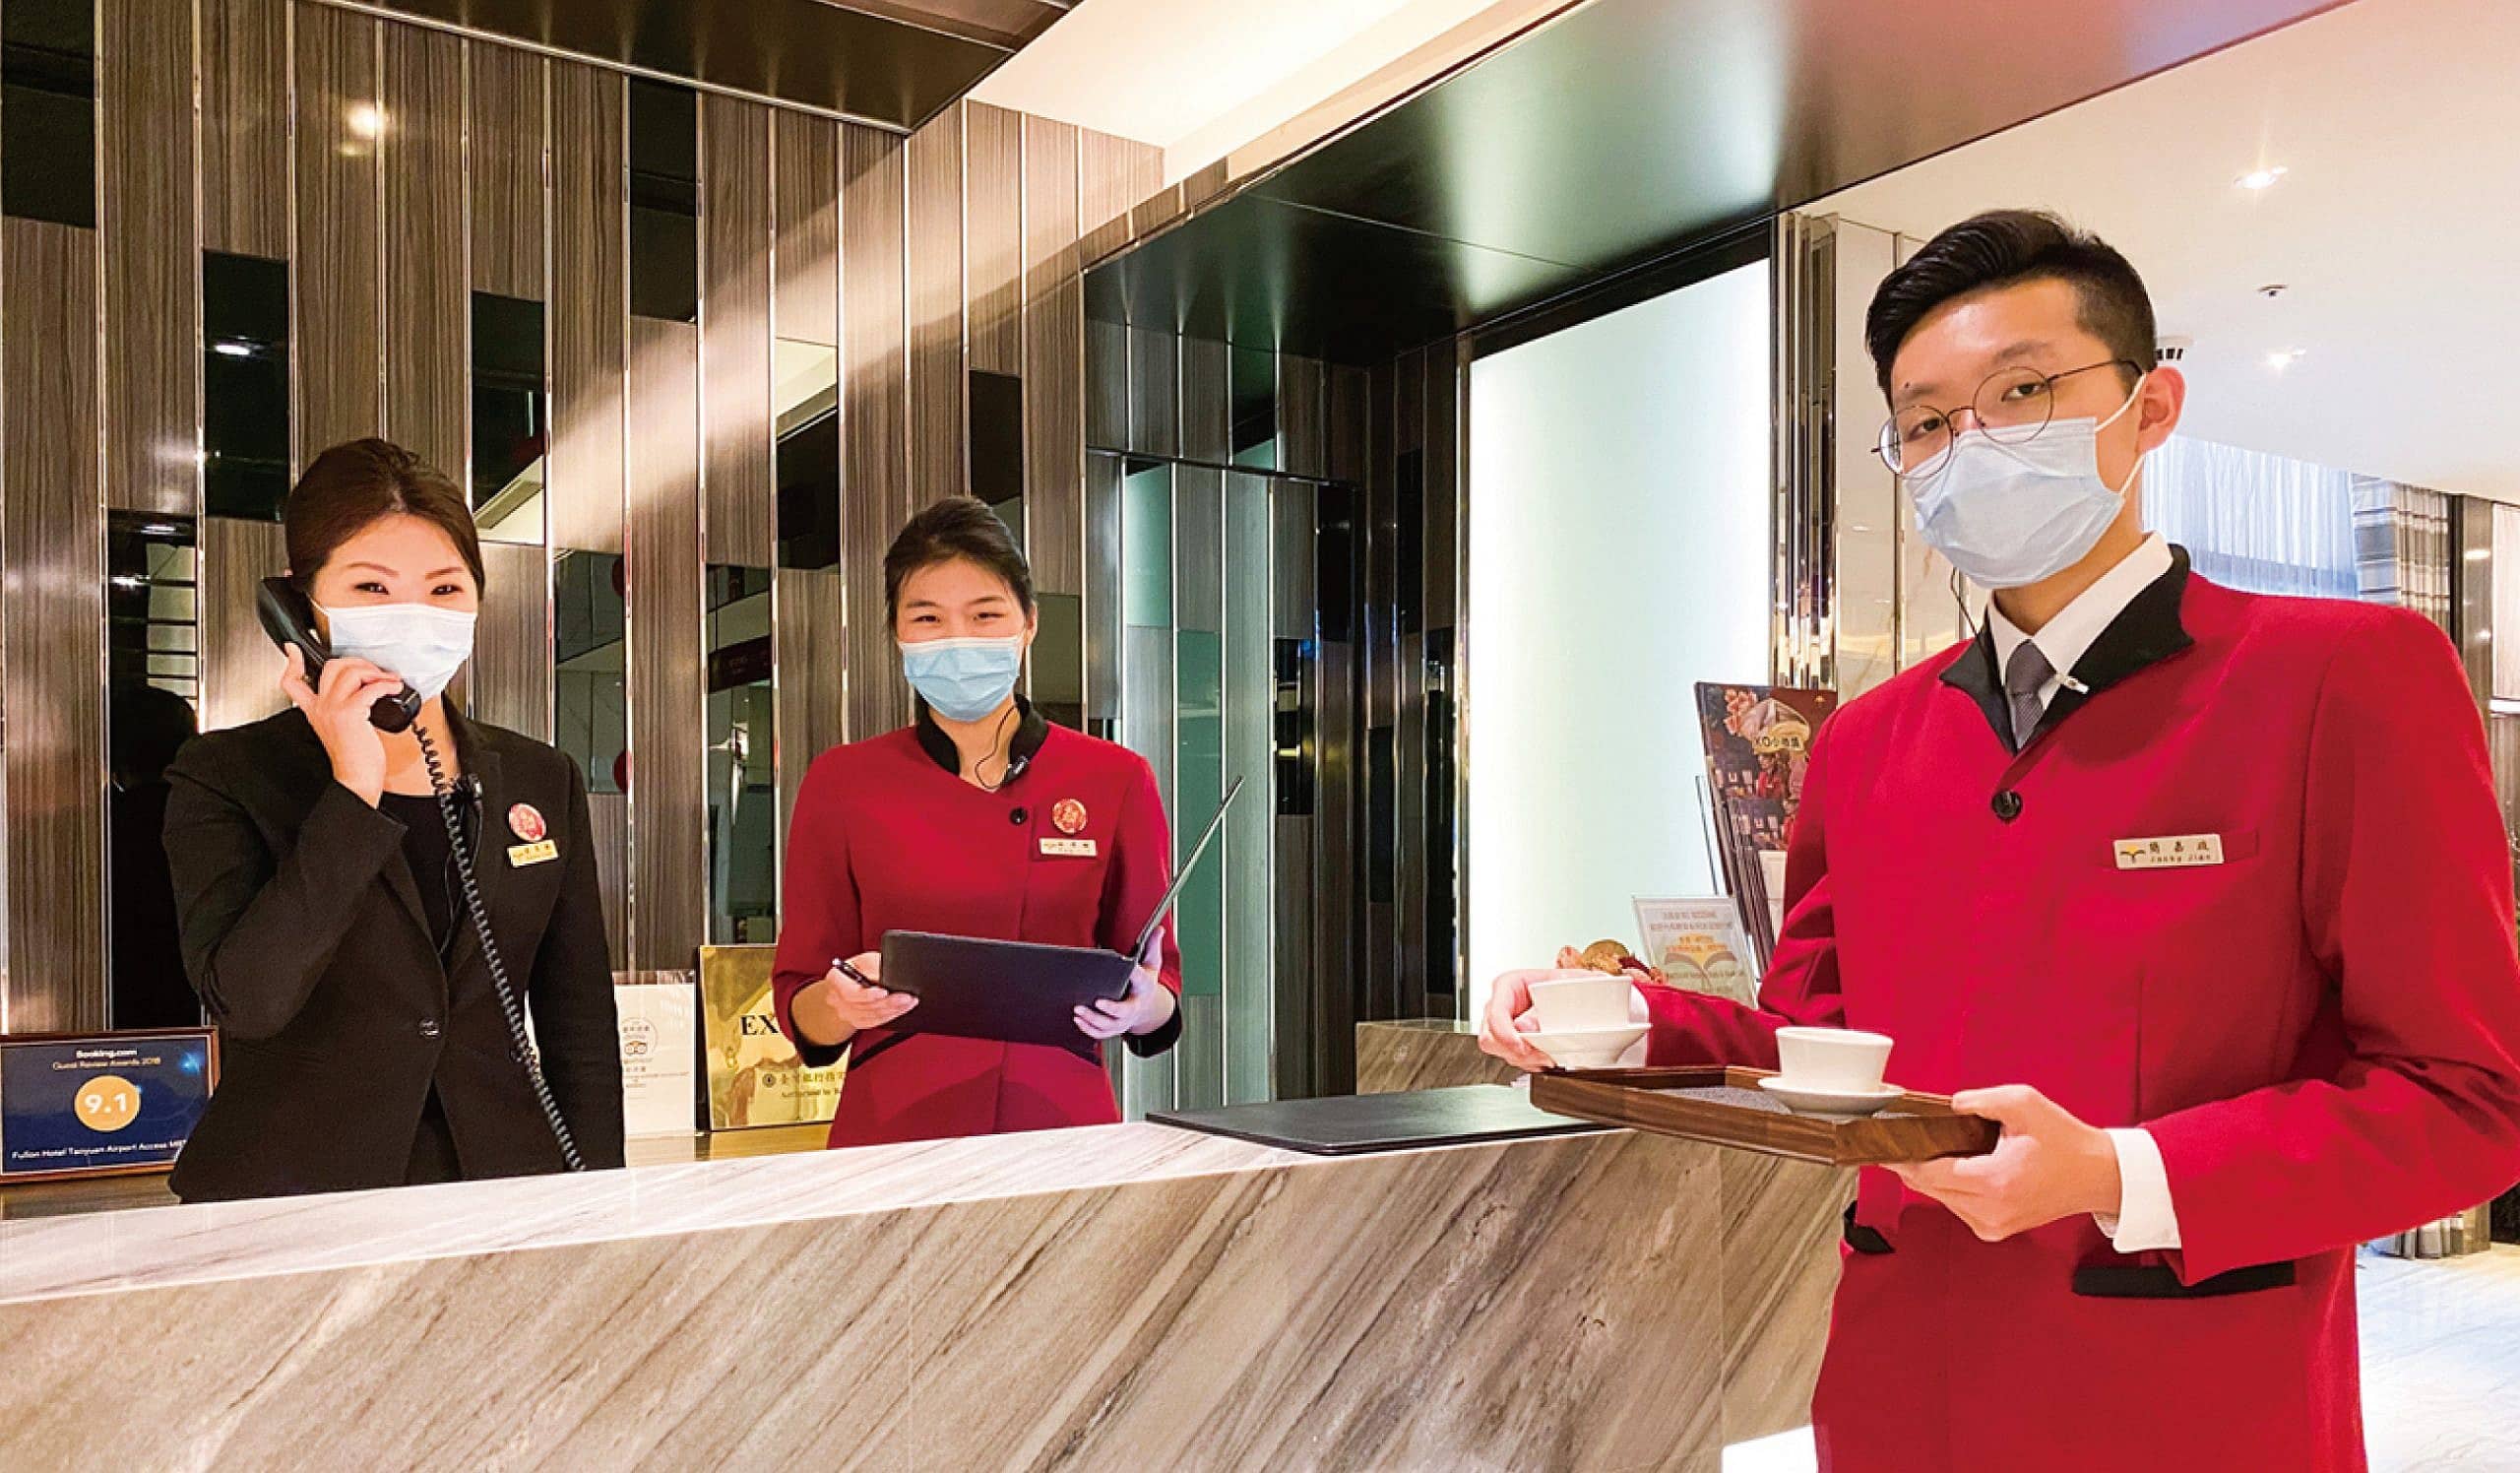 Hotel Staff with masks